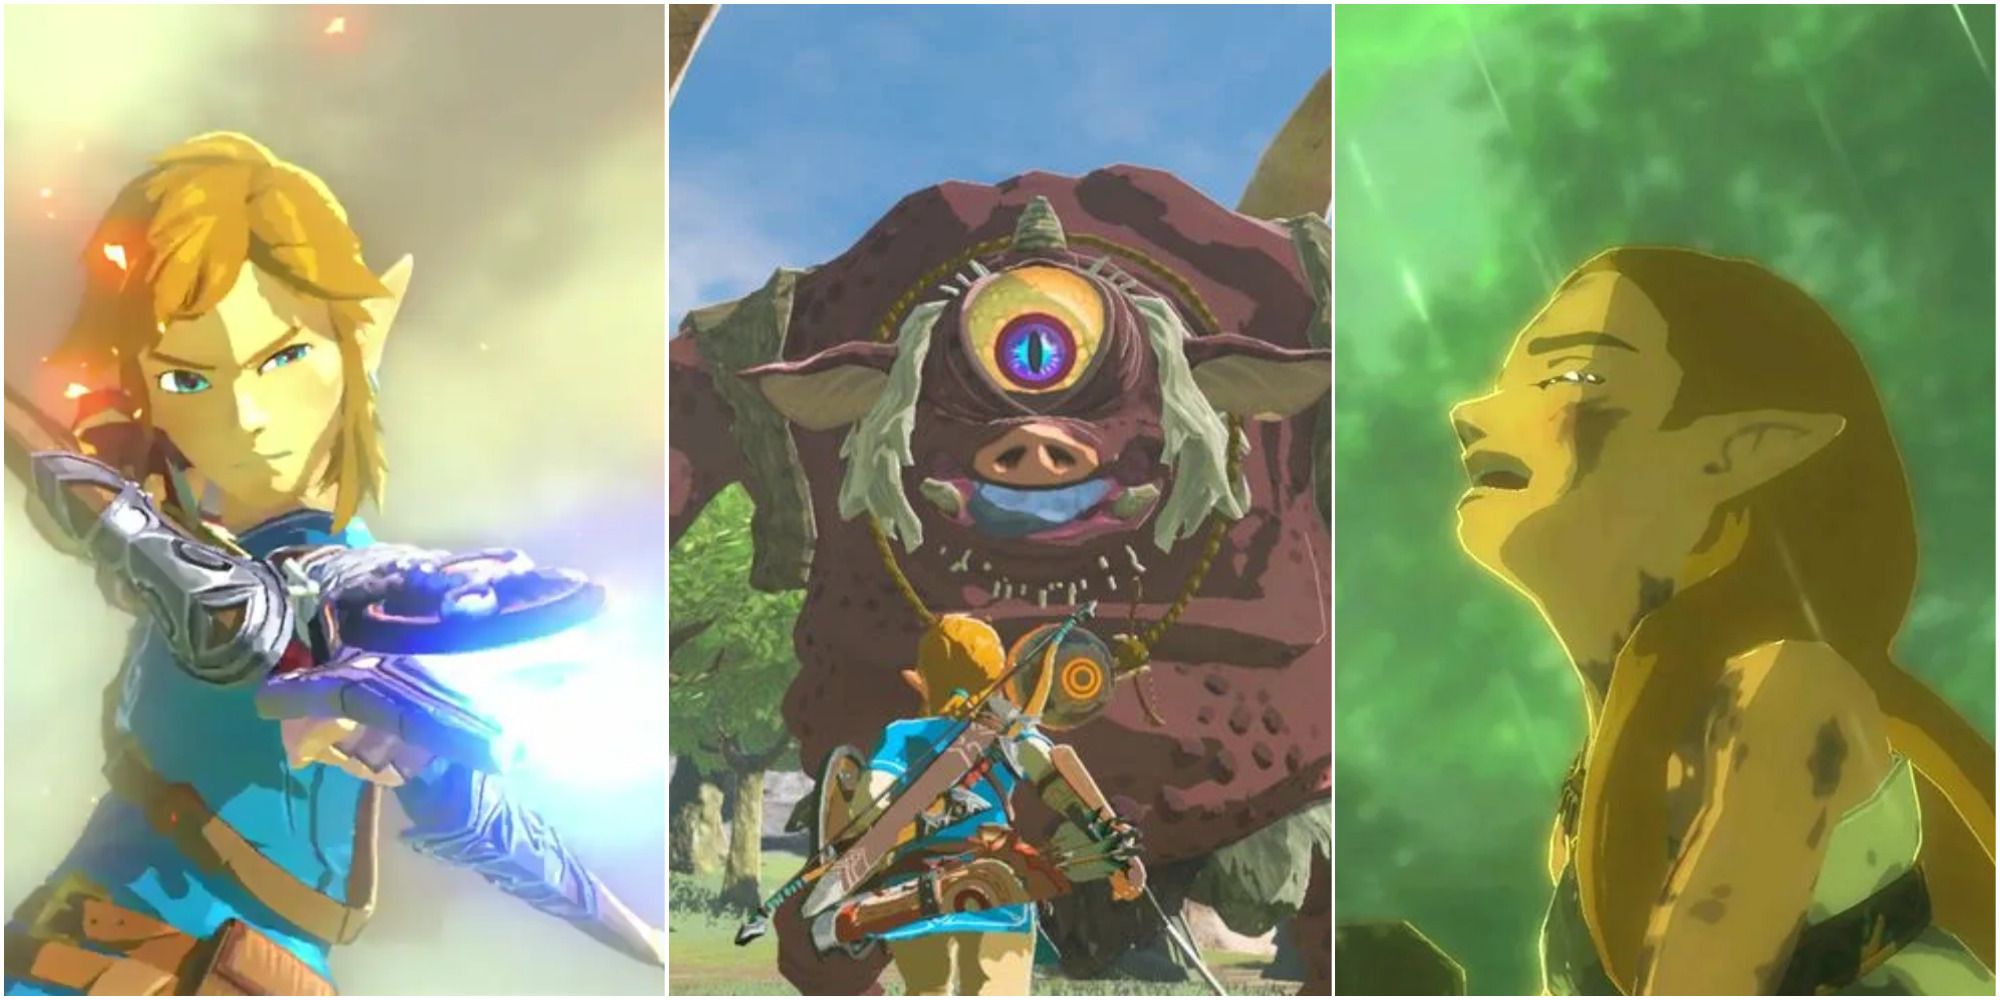 A collage of images from The Legend Of Zelda: Breath Of The Wild